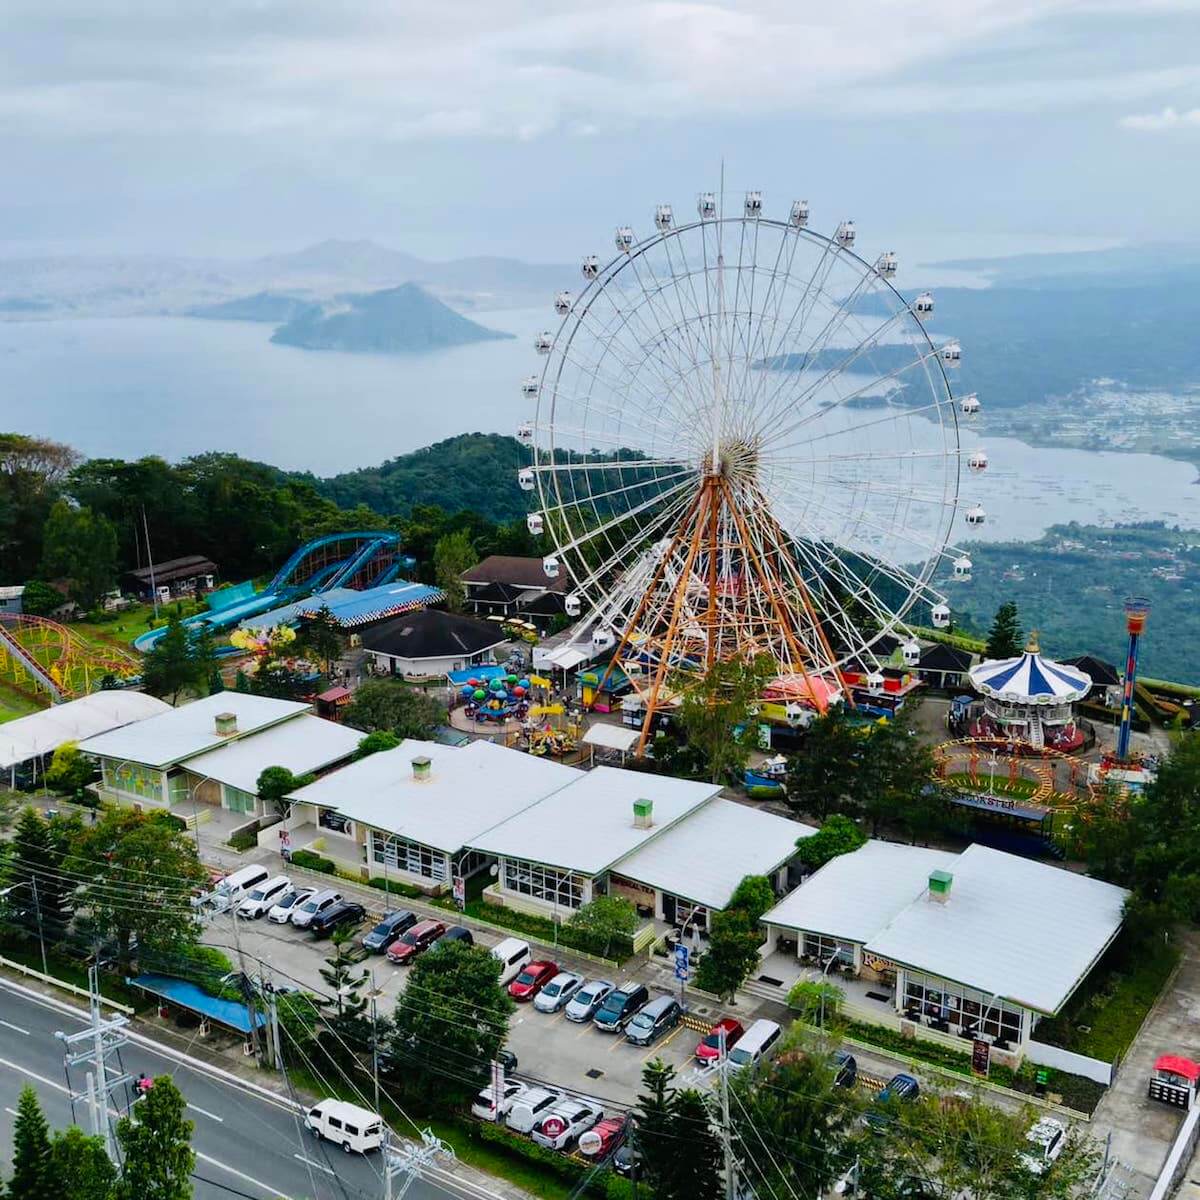 Sky Ranch Tagaytay is one of the scenic theme parks in the Philippines